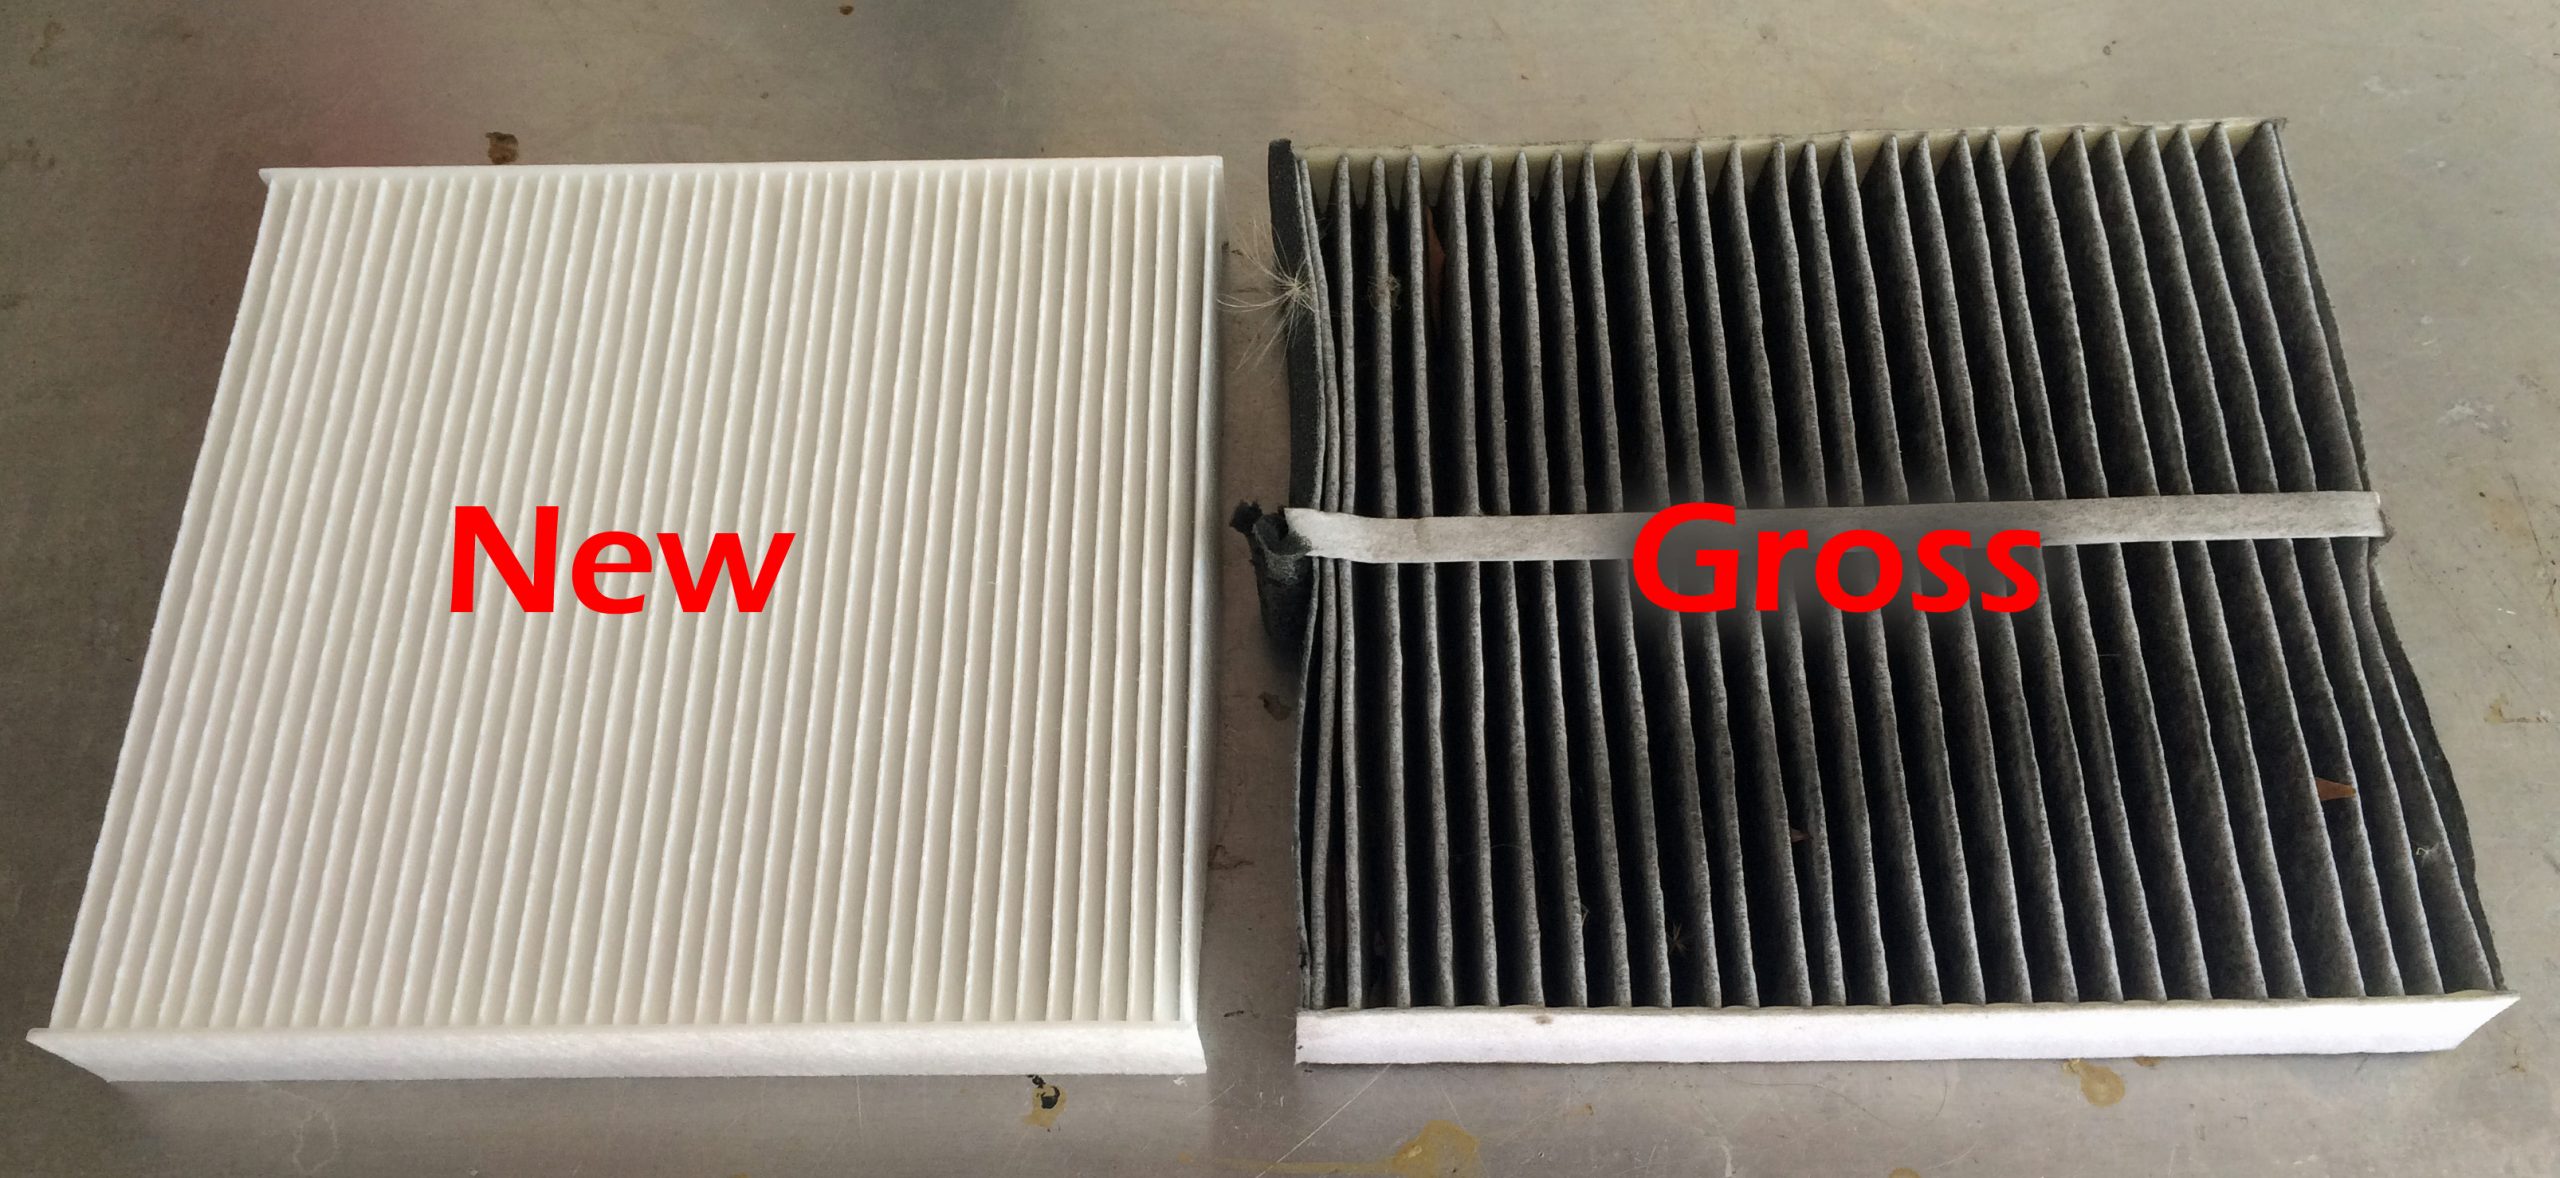 Air Cabin Filter: Everything You Need To Know